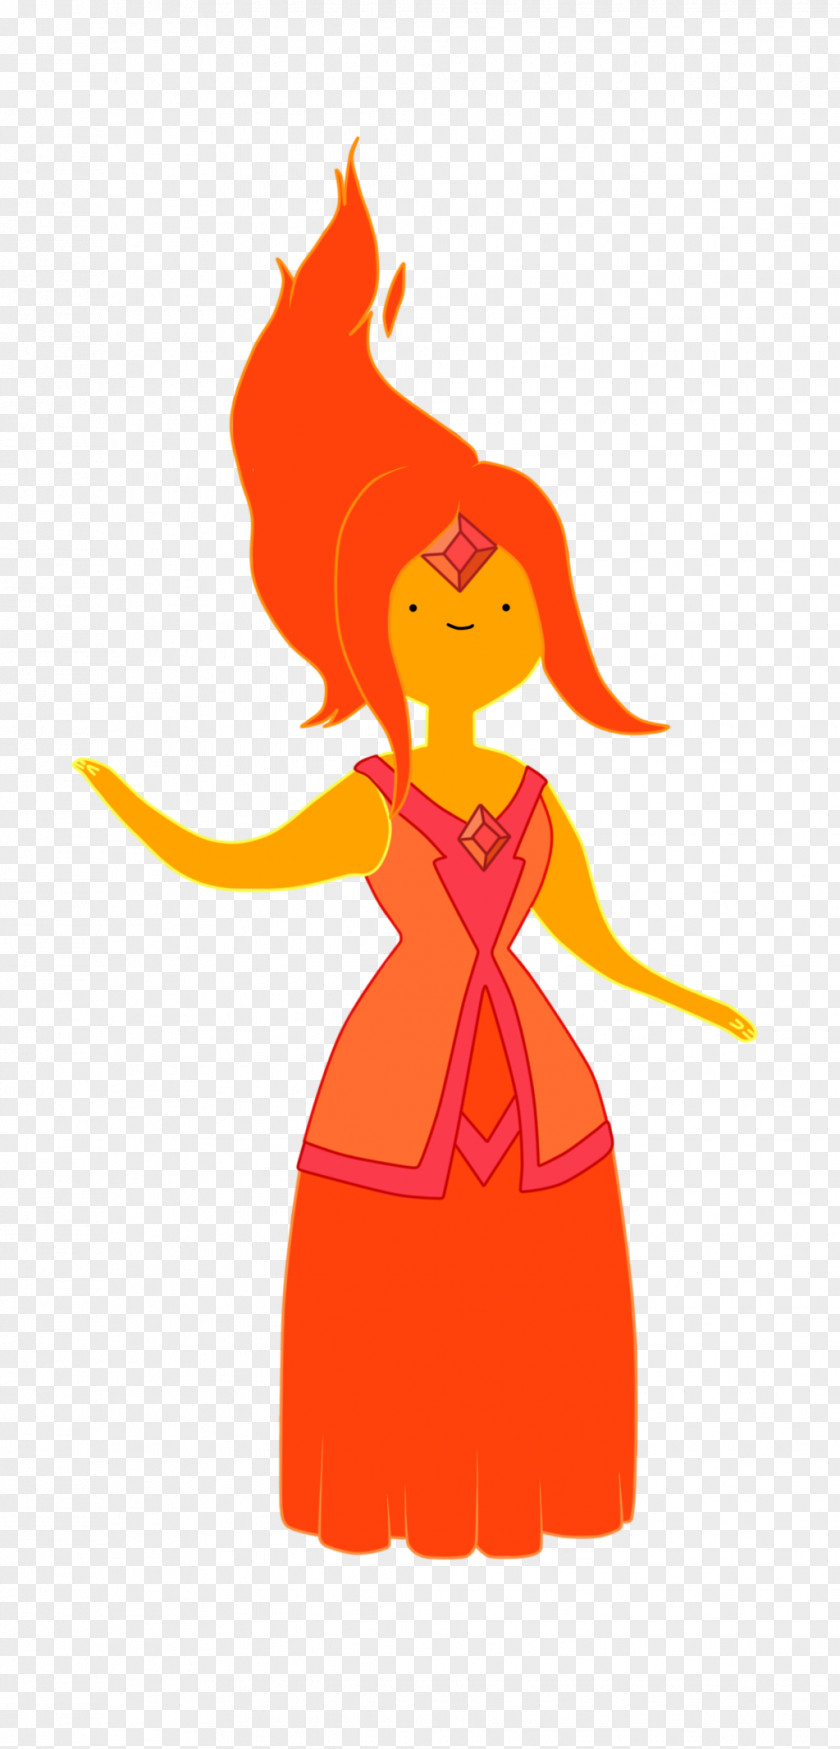 Finn The Human Flame Princess Marceline Vampire Queen Adventure Time: Explore Dungeon Because I Don't Know! Jake Dog PNG